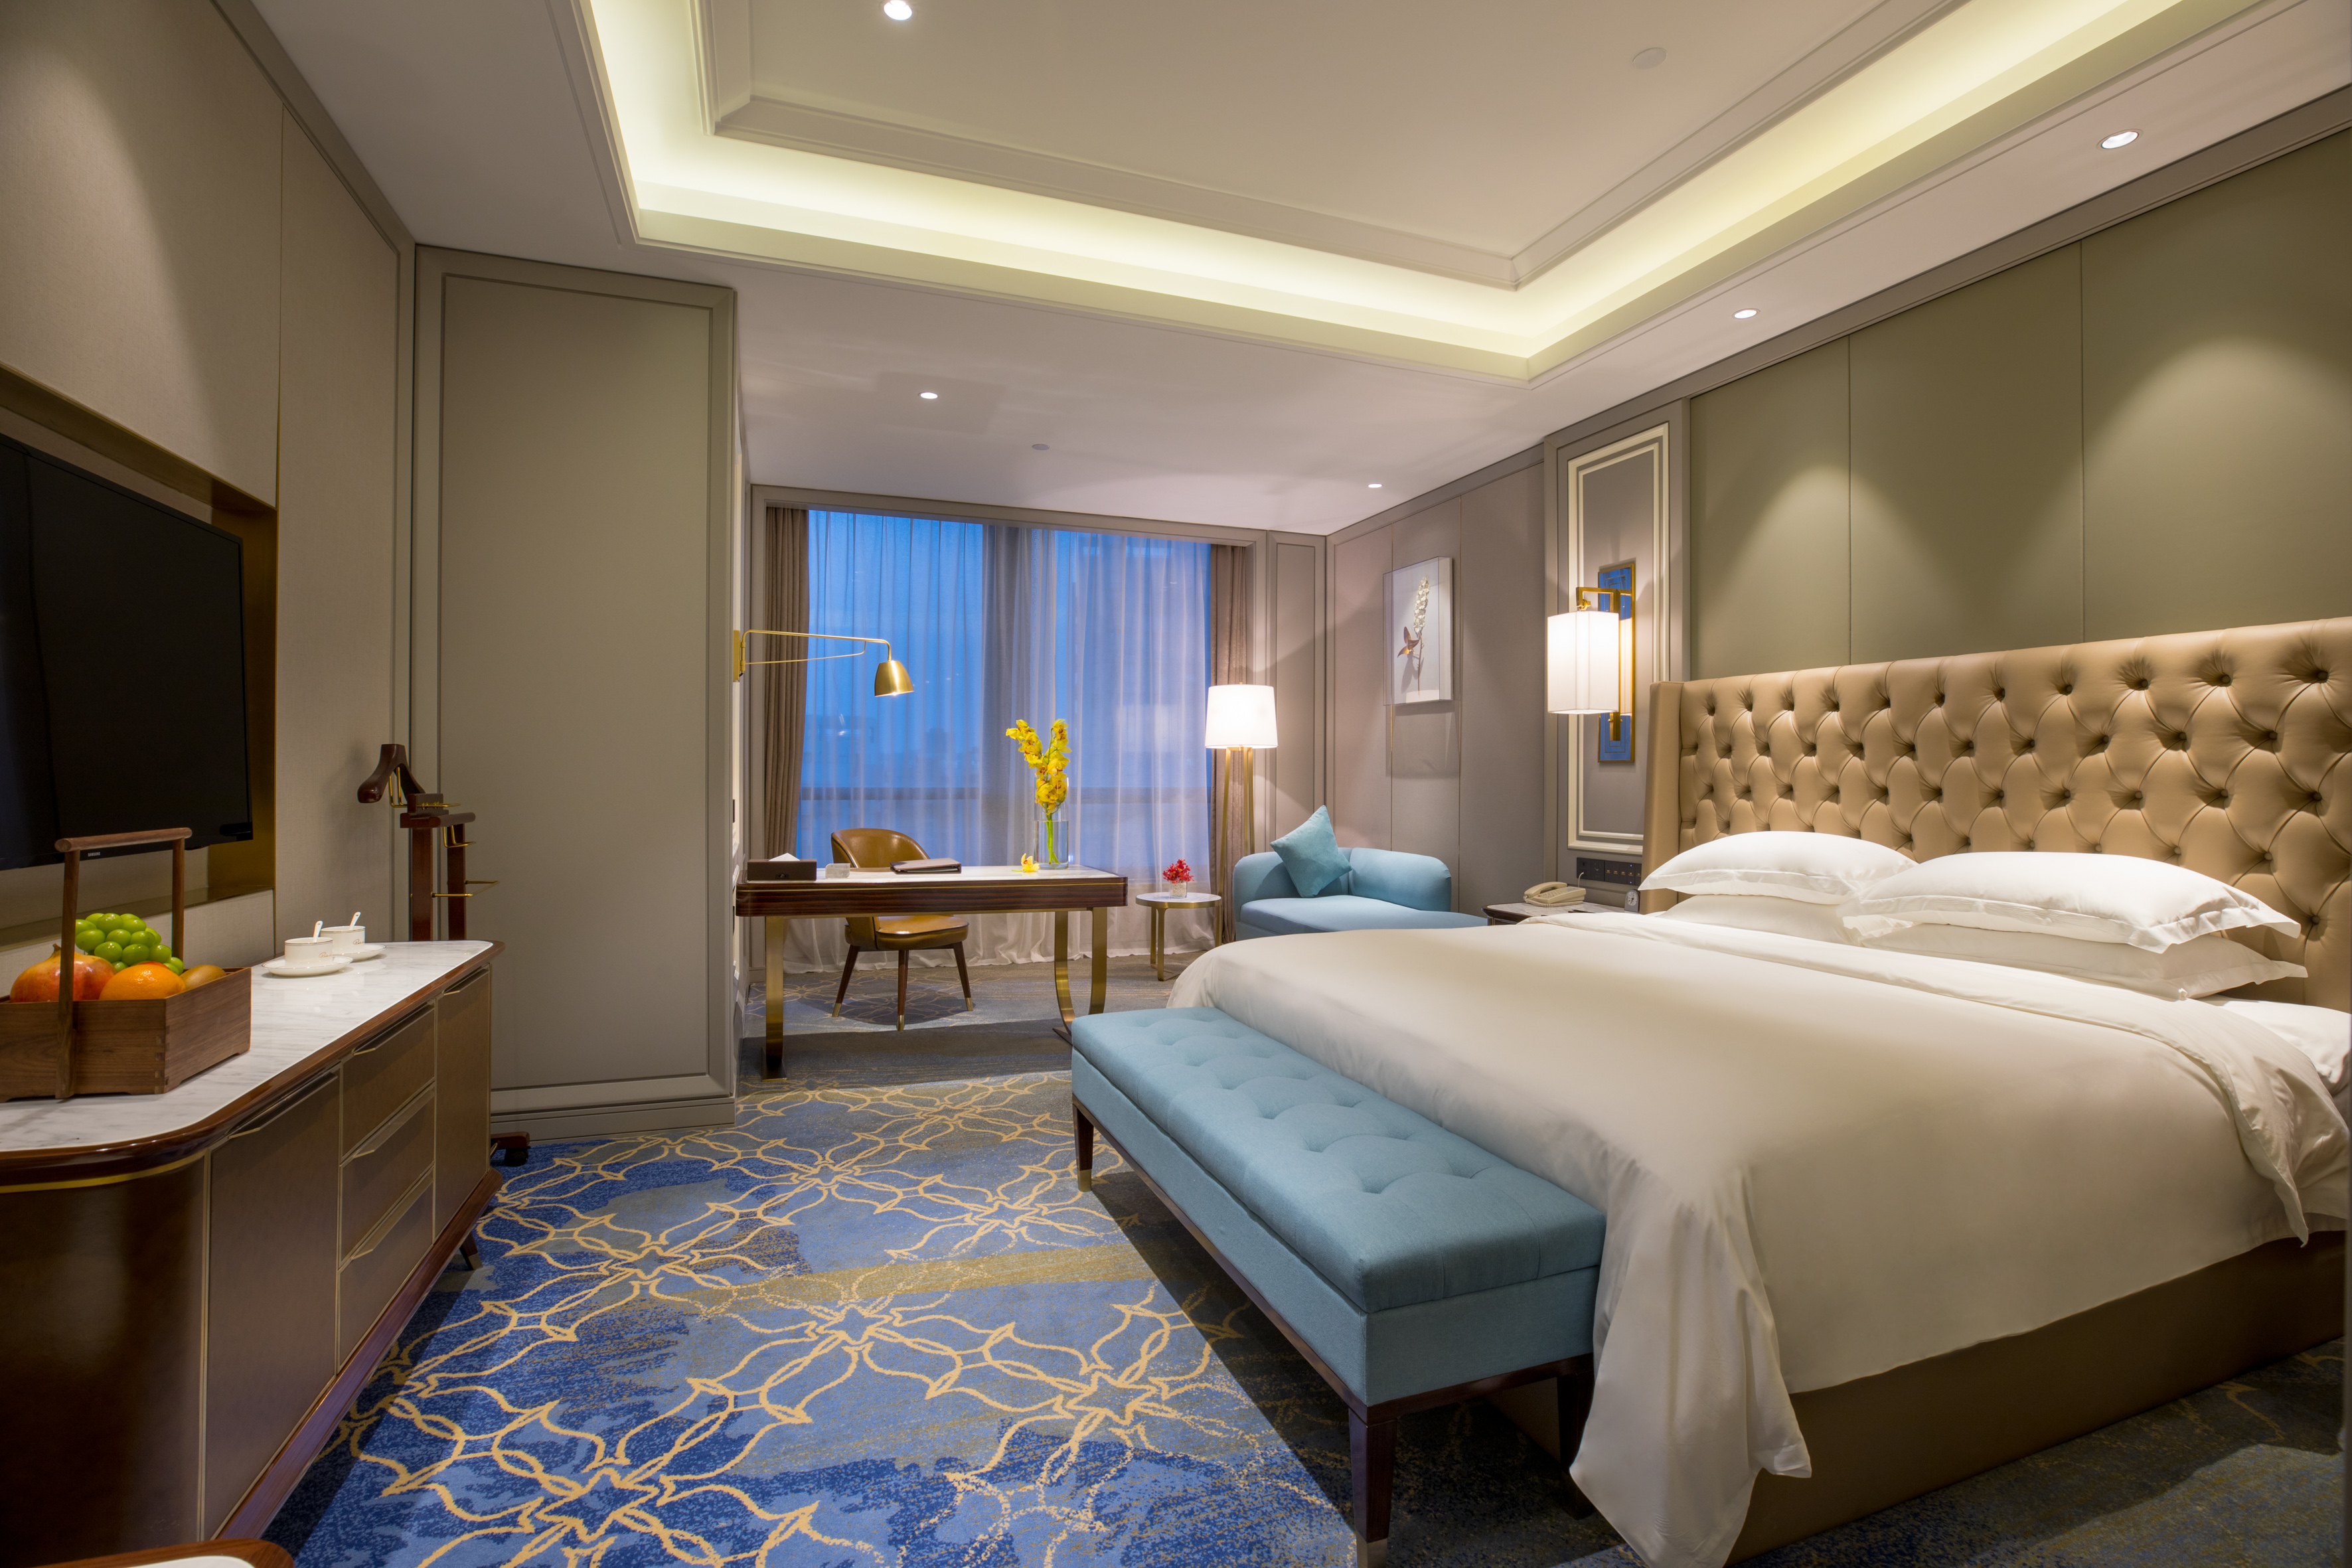 Luxury King Size Room（Including service charge and 2 buffet breakfasts）